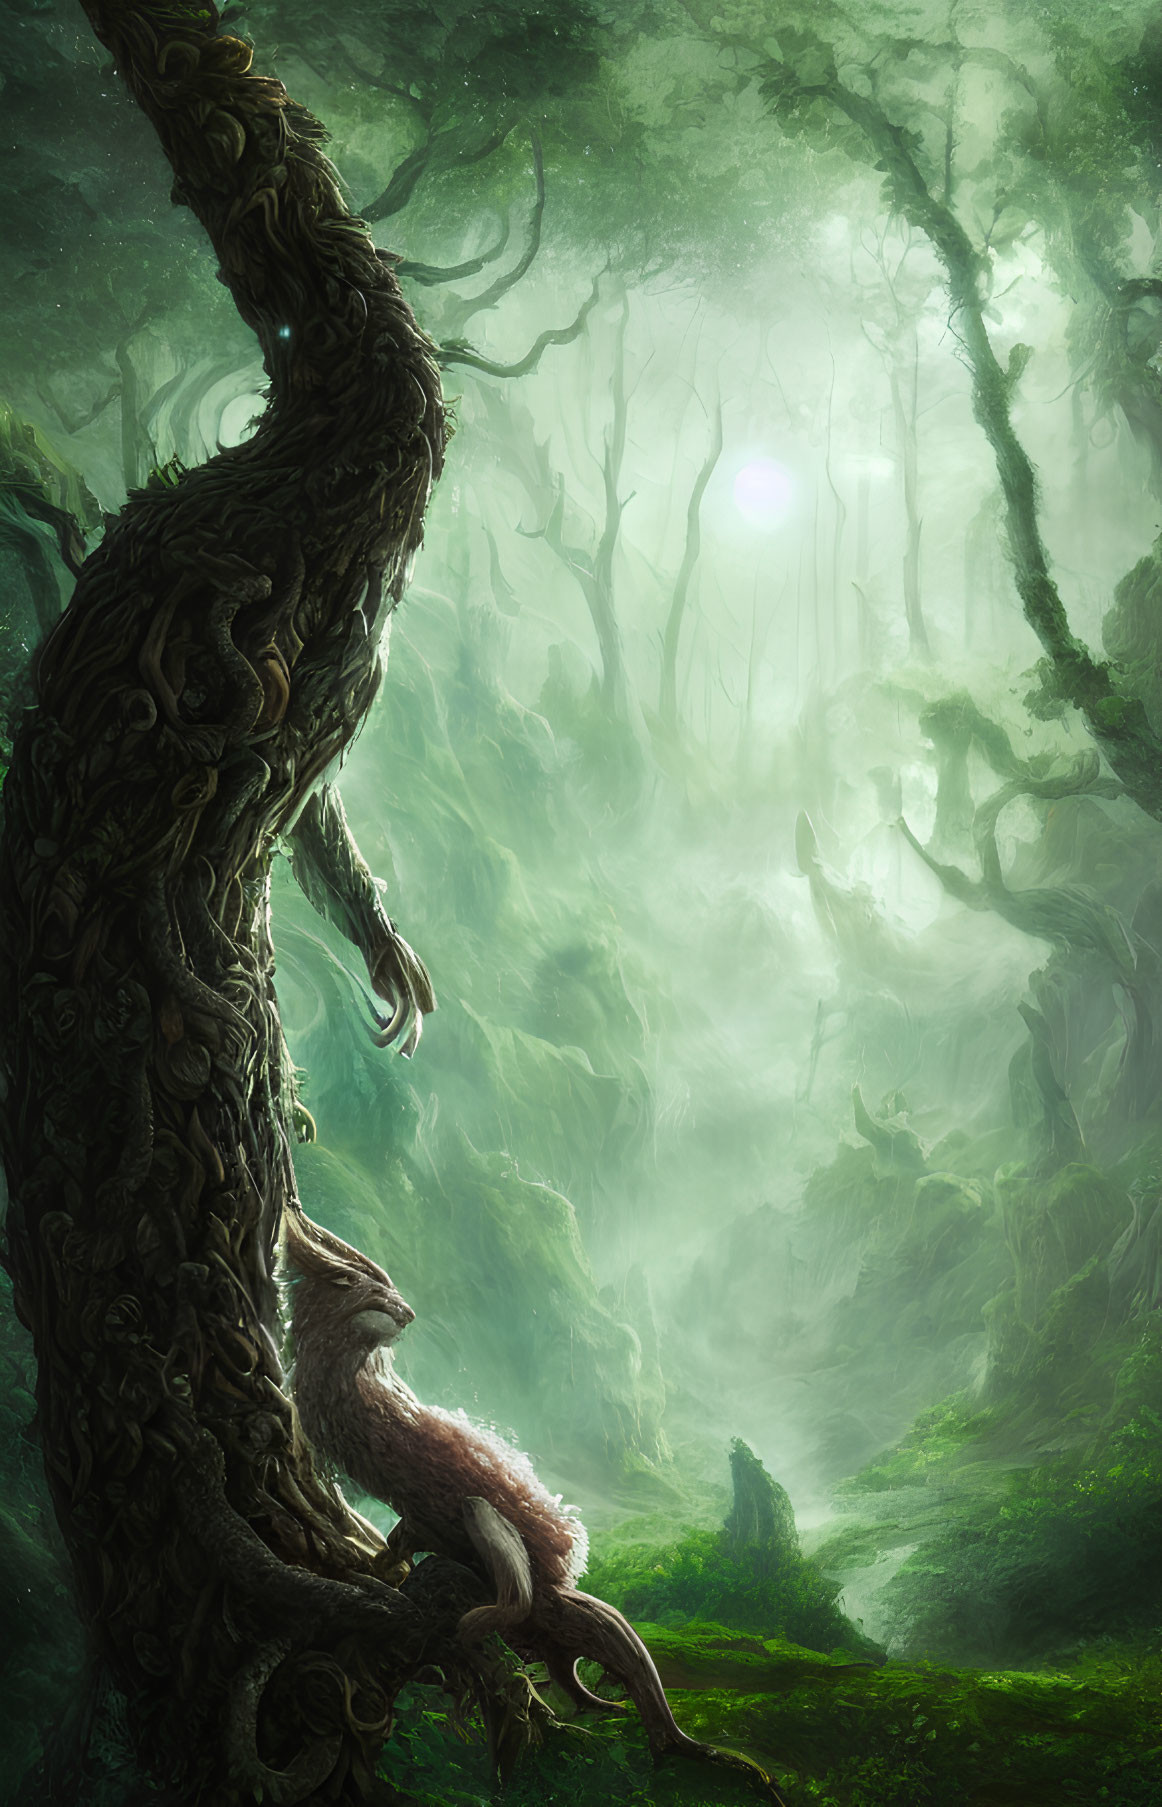 Enormous gnarled tree in mystical forest with ethereal green light